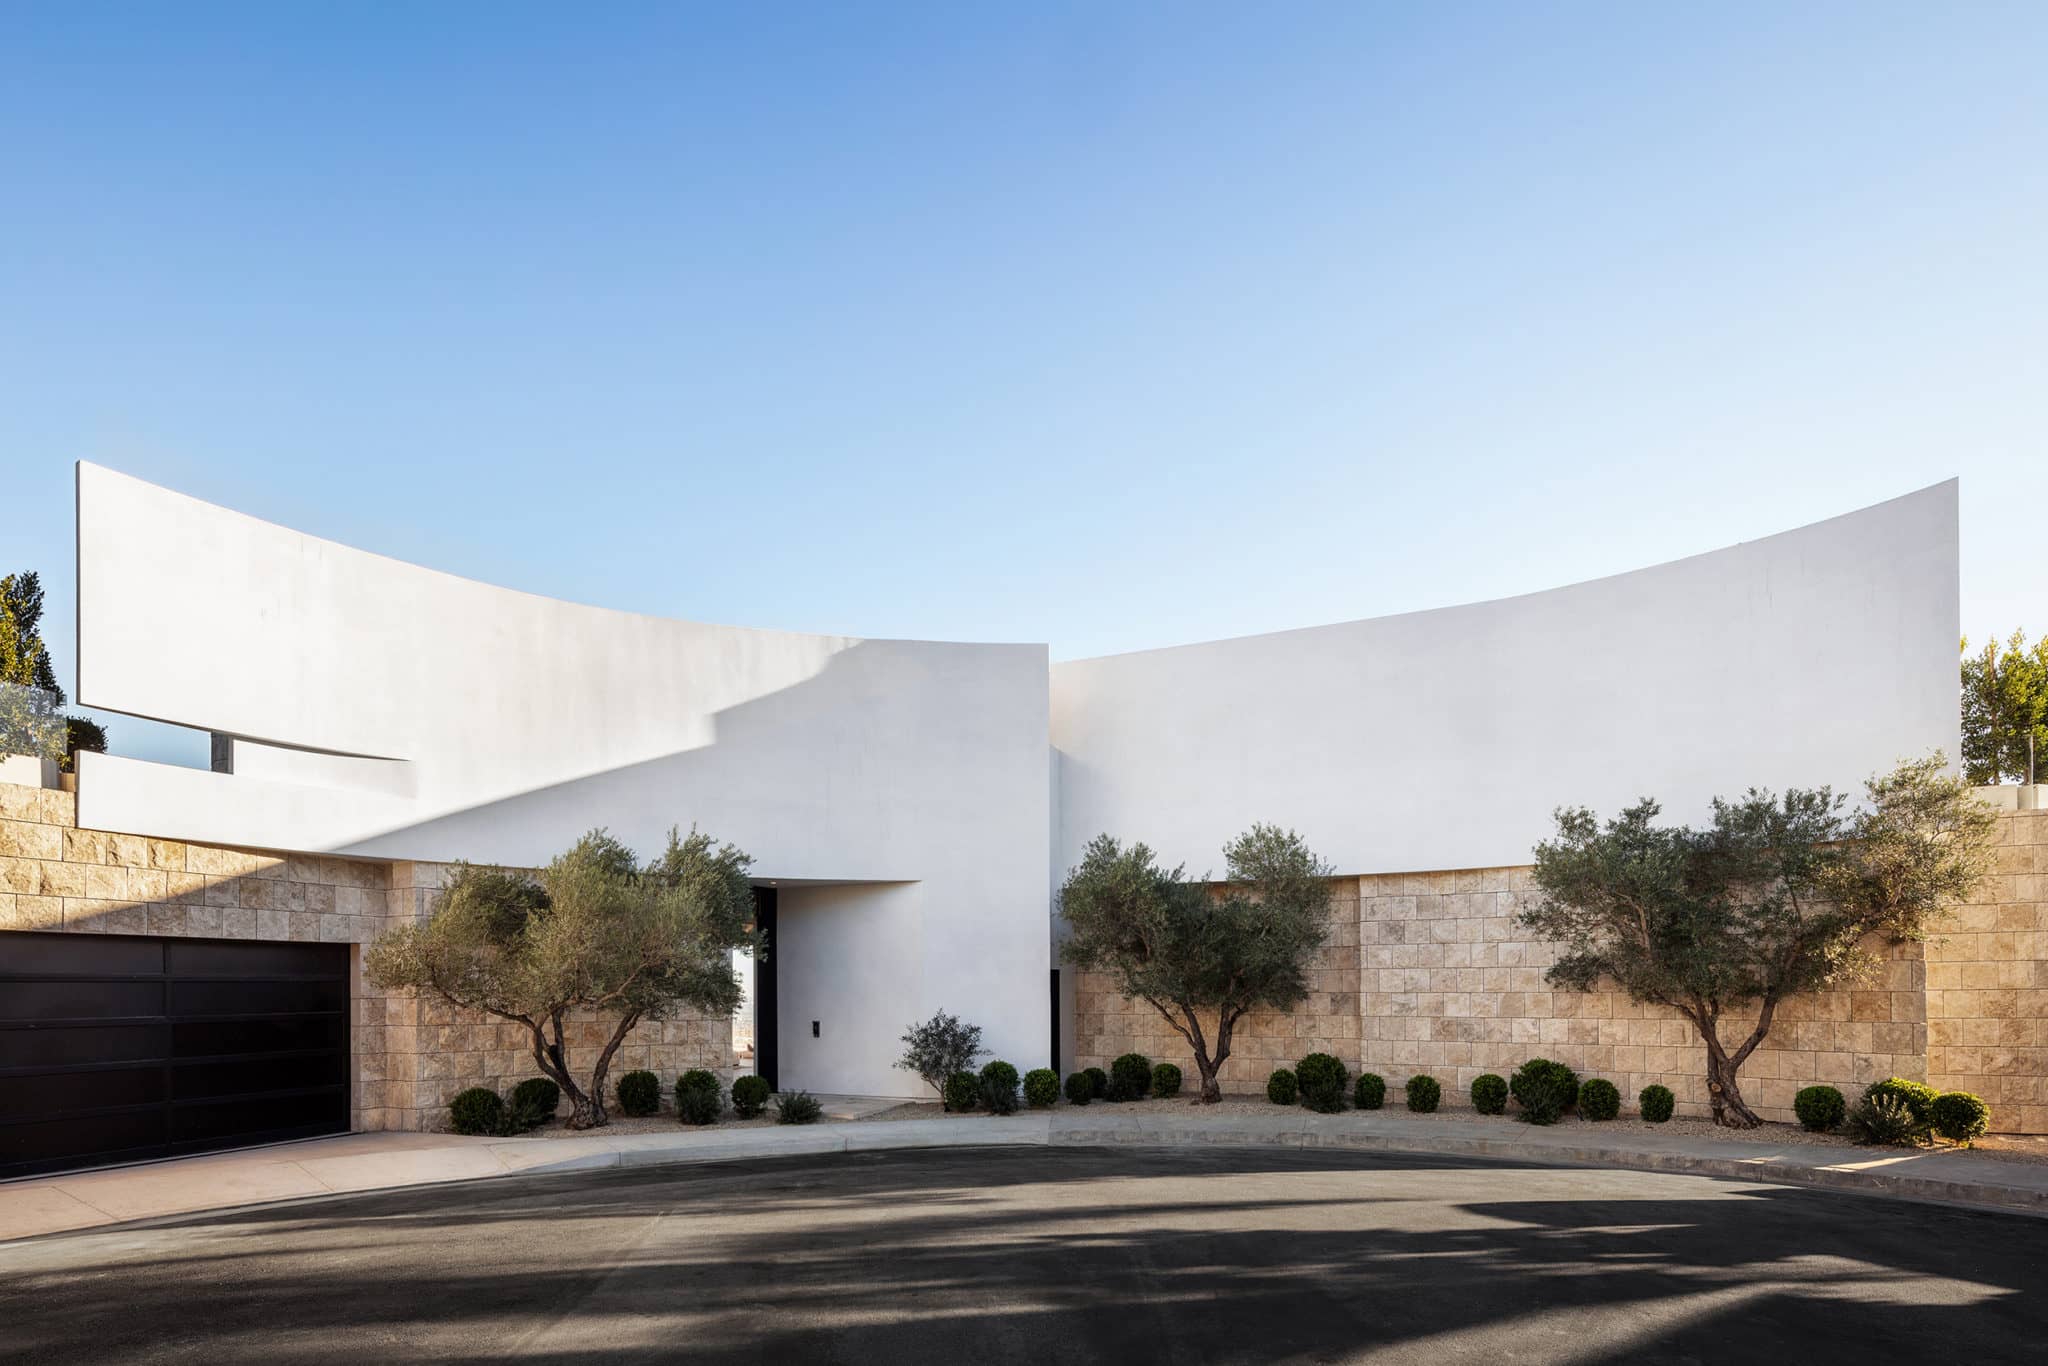 Exterior photography of entrance to a minimalist curved façade/house; day mode frontal street view.